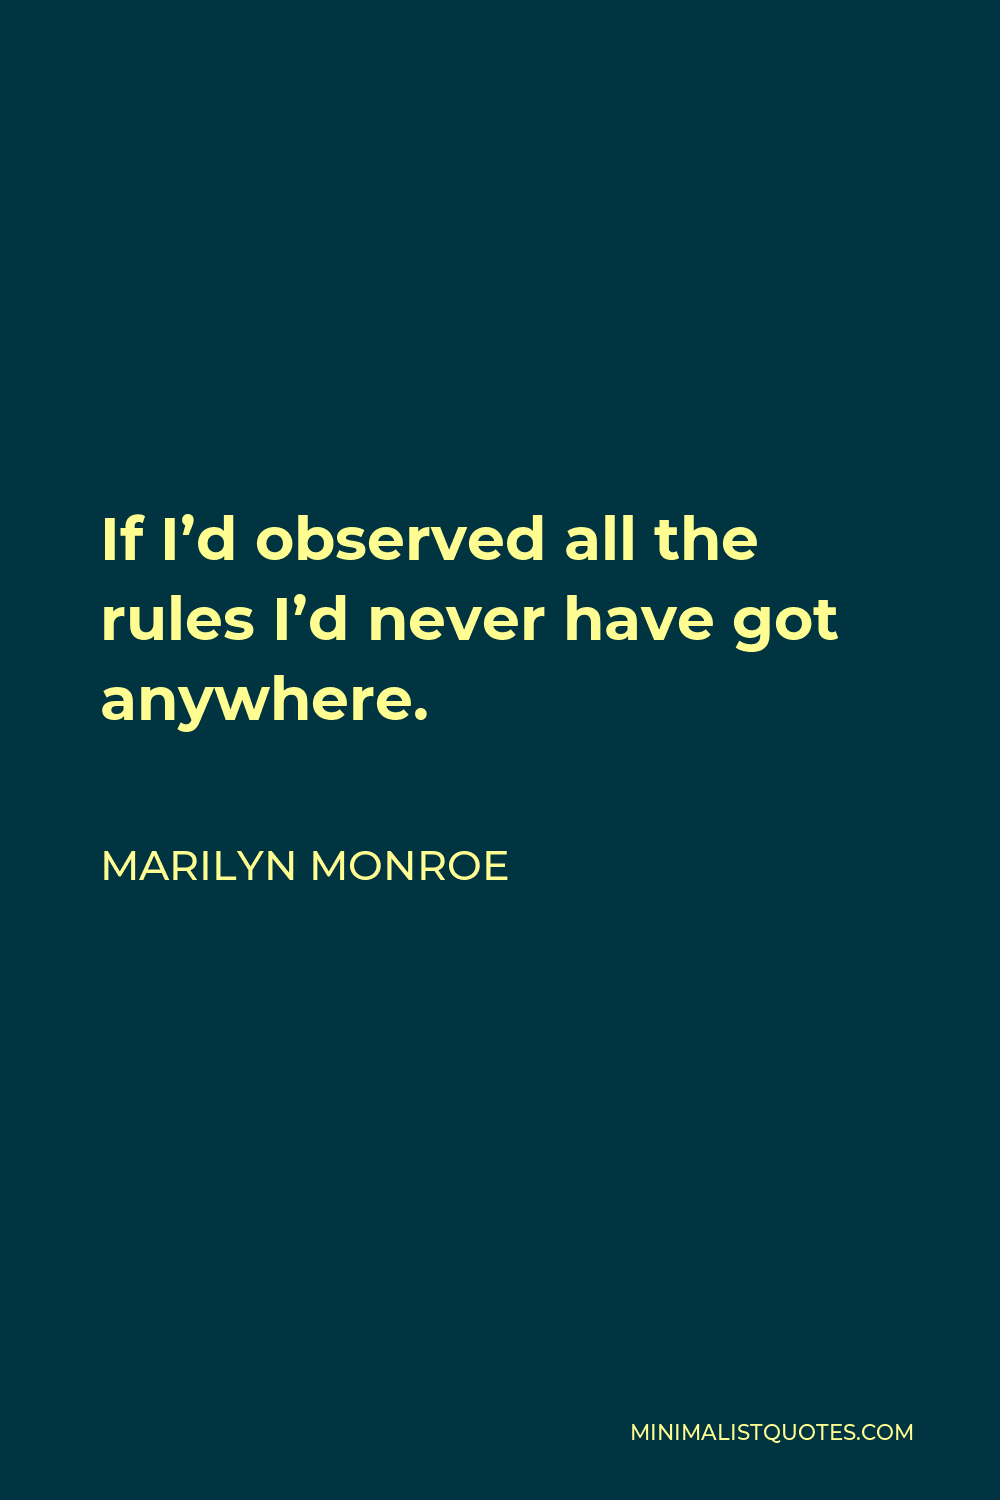 Marilyn Monroe Quote - If I’d observed all the rules I’d never have got anywhere.